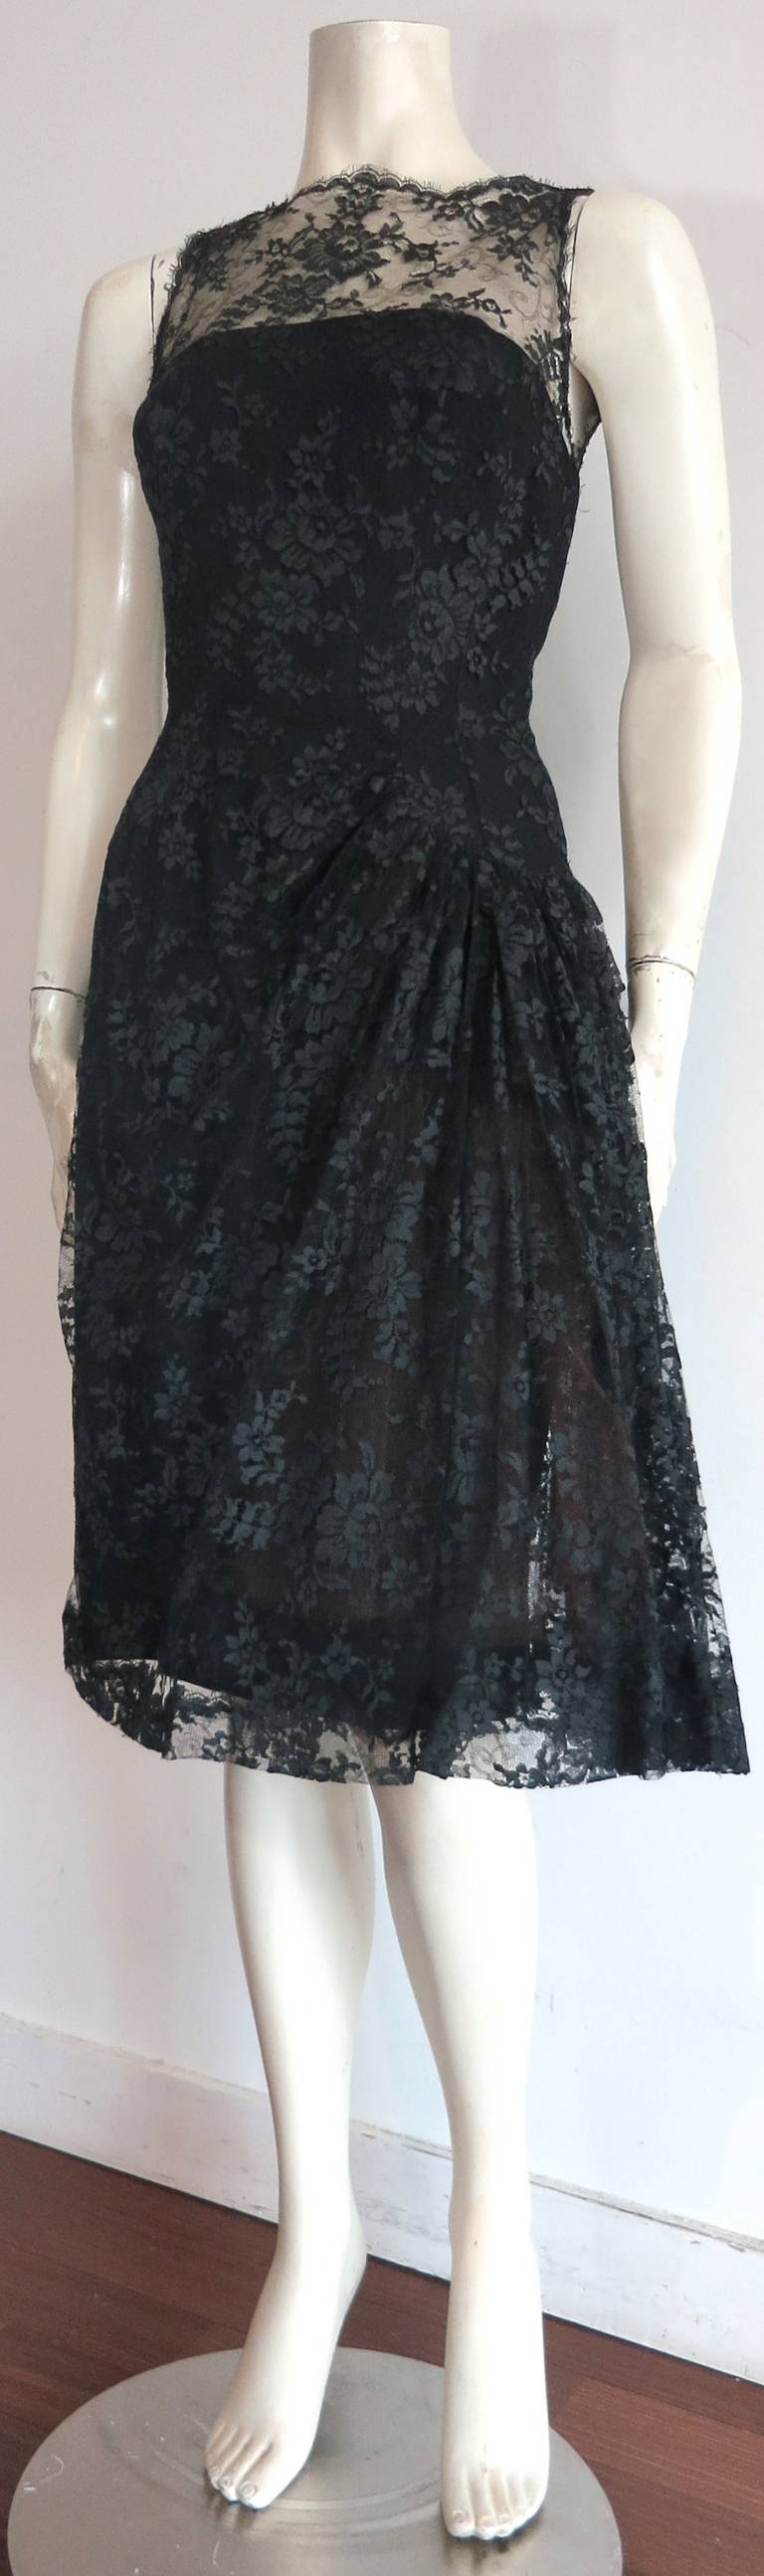 Stunning, LUIS ESTEVEZ Chantilly lace cocktail dress.

This lovely dress was designed by Luis Estevez during the 1960's in the USA, and is union labeled.

The black, Chantilly lace is very detailed with beautiful florals in the foreground, and